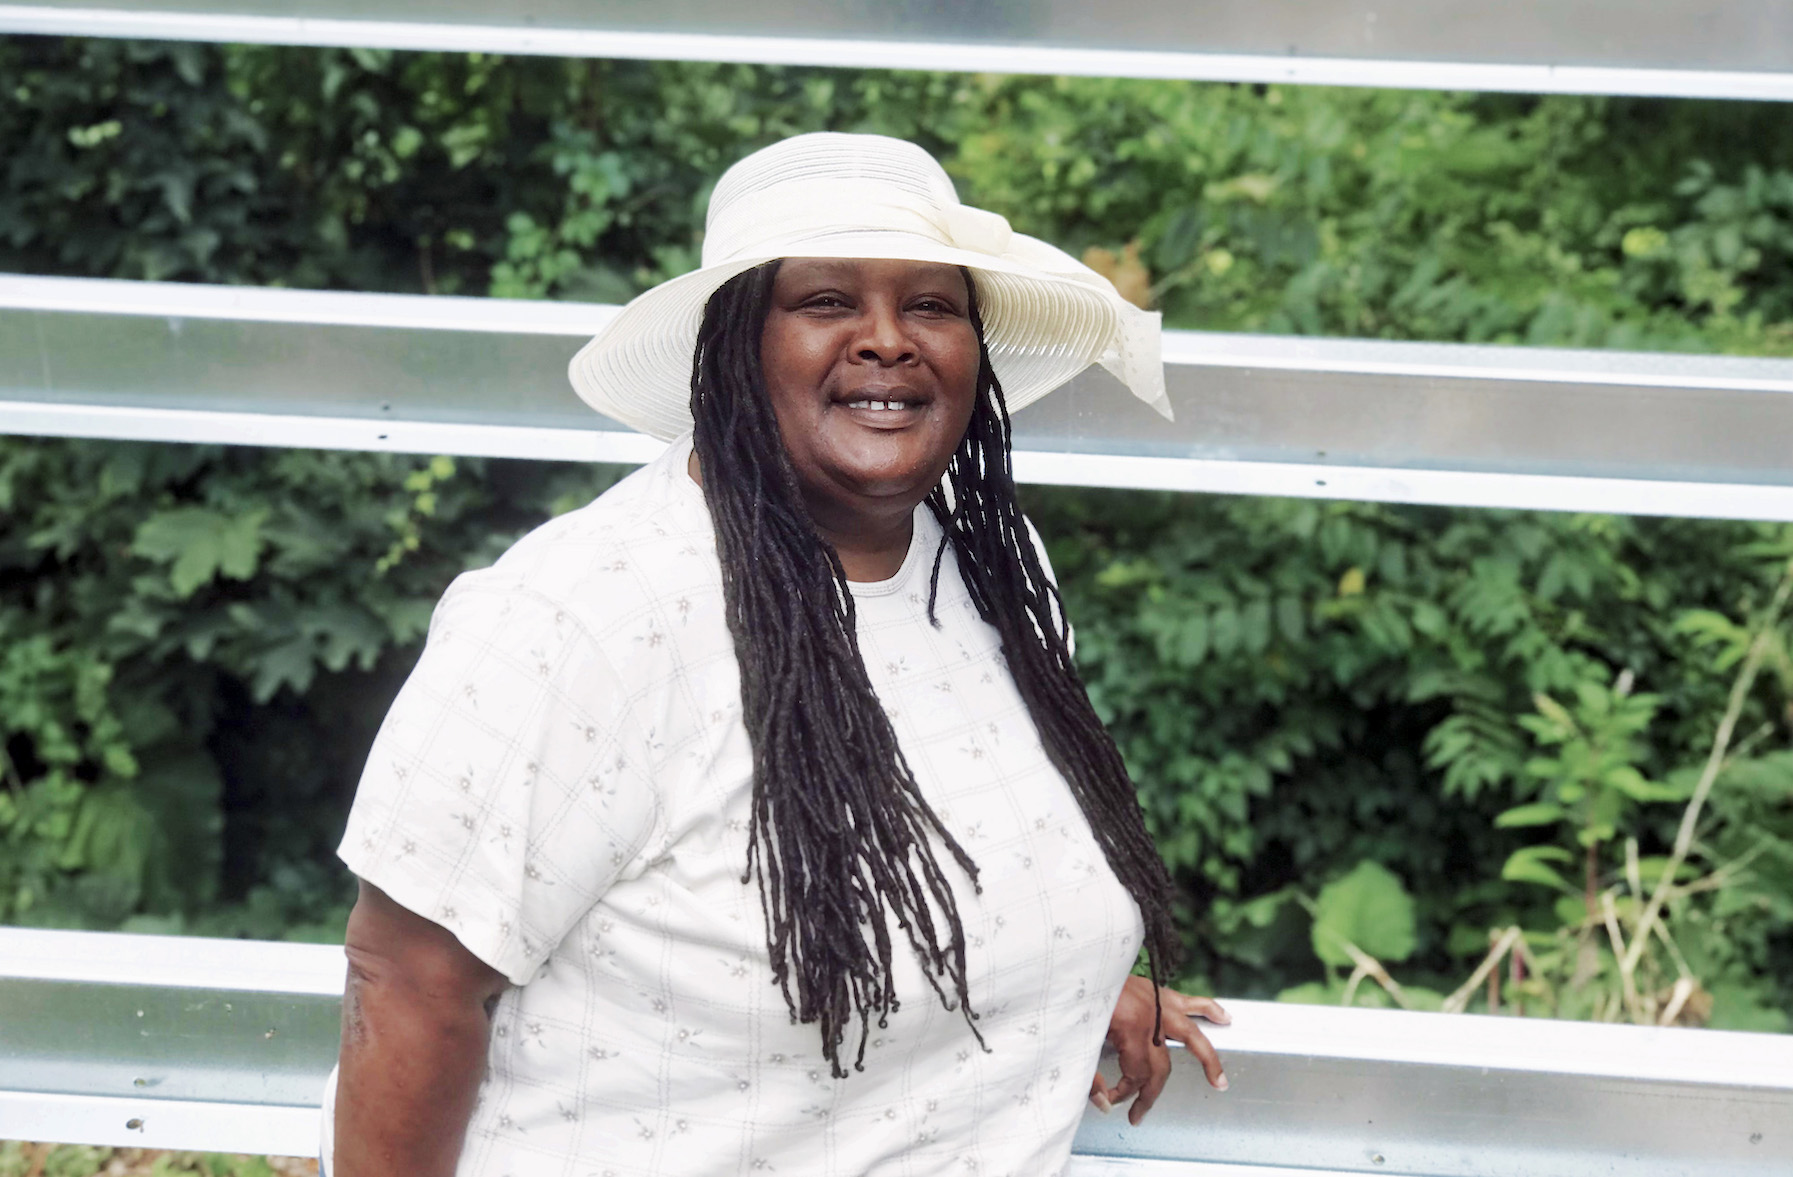 Tammi Black smiles wearing a white blouse and sunhat in front of metal bars over green bushes. Her hair is in tight braids.